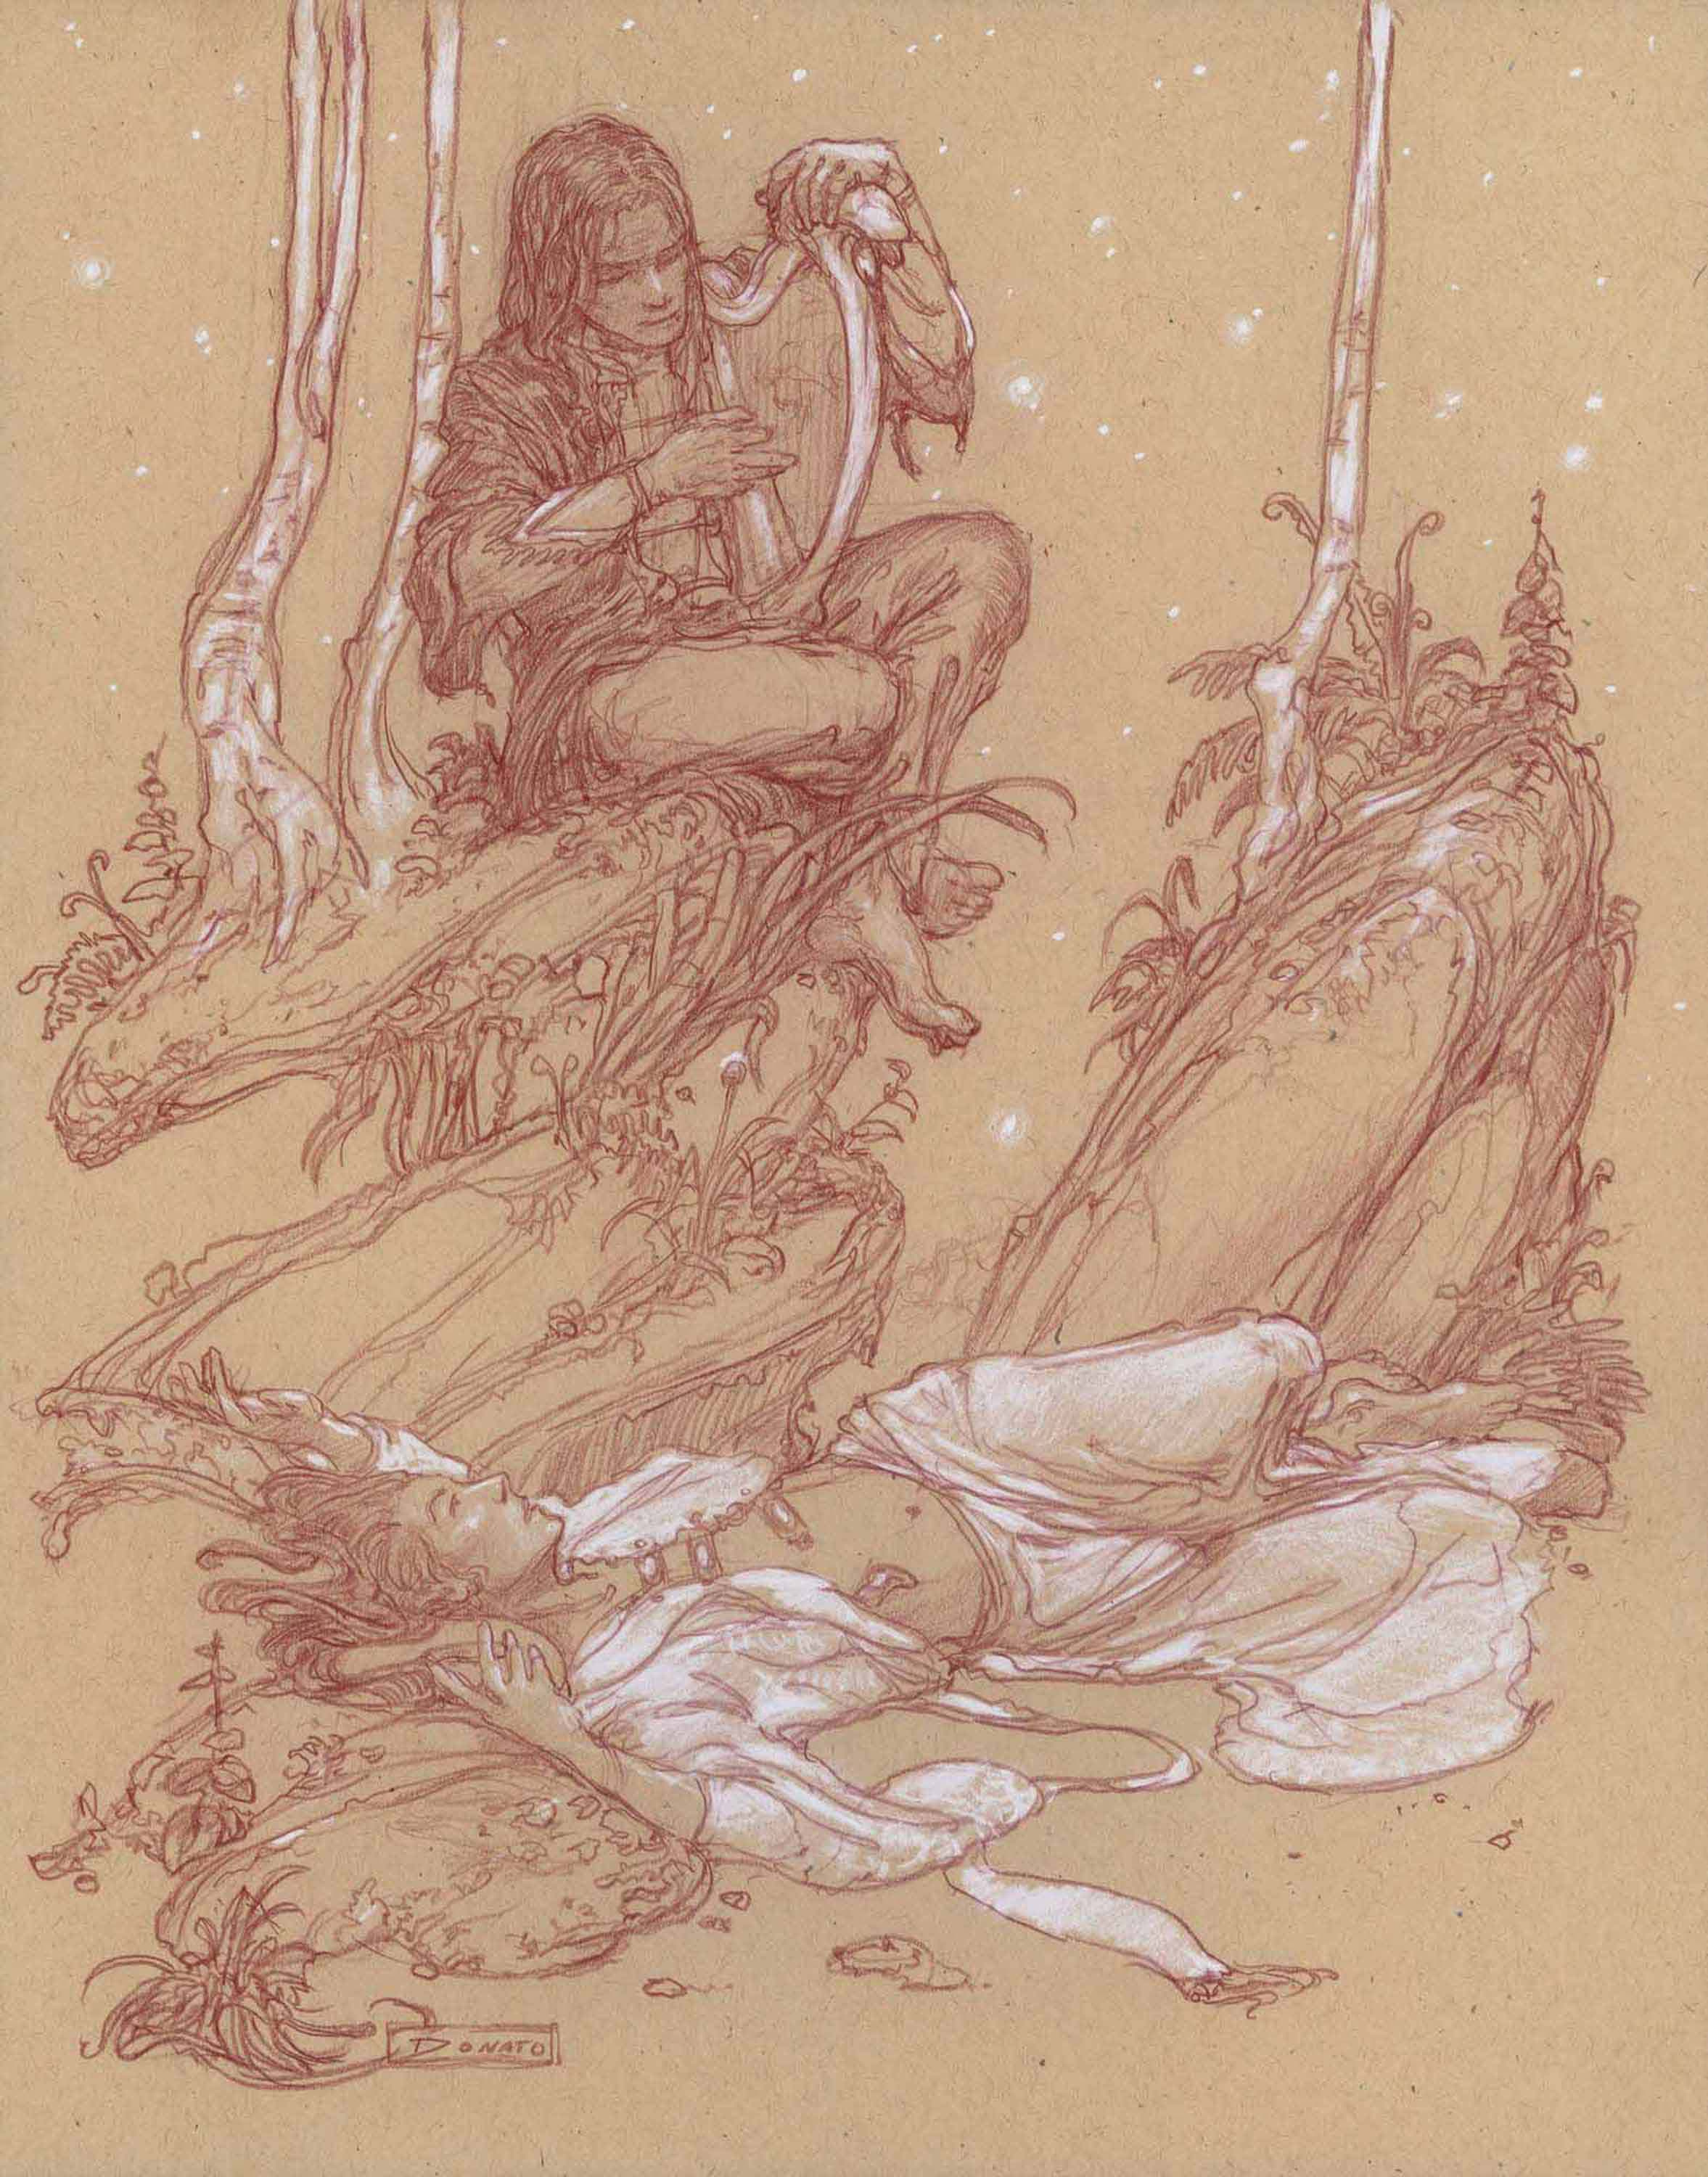 Beren and Luthien - Twilight
14" x11"  Watercolor Pencil and Chalk on Toned paper 2012
private collection